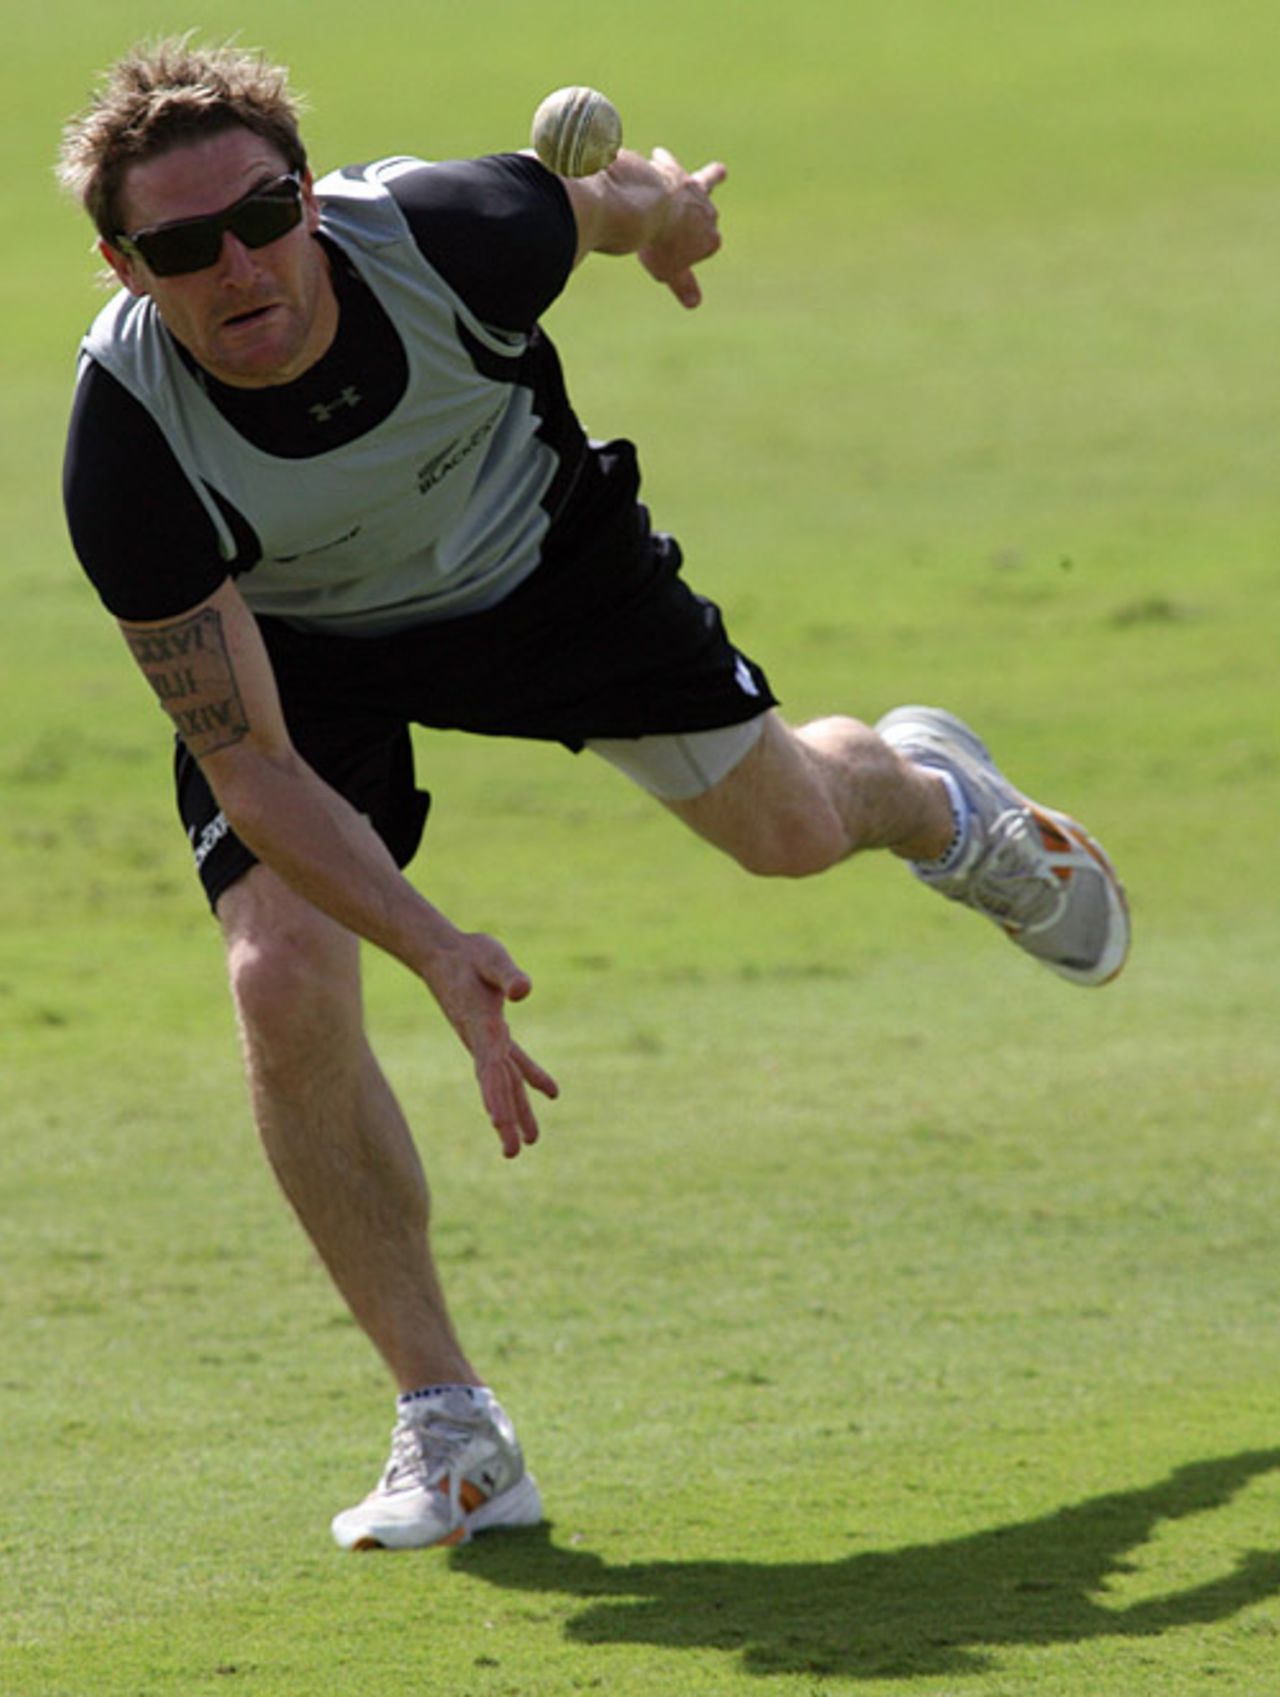 Brendon McCullum flings in a return during New Zealand's fielding session, 2007 World Cup, Kensington Oval, Barbados, March 5, 2007